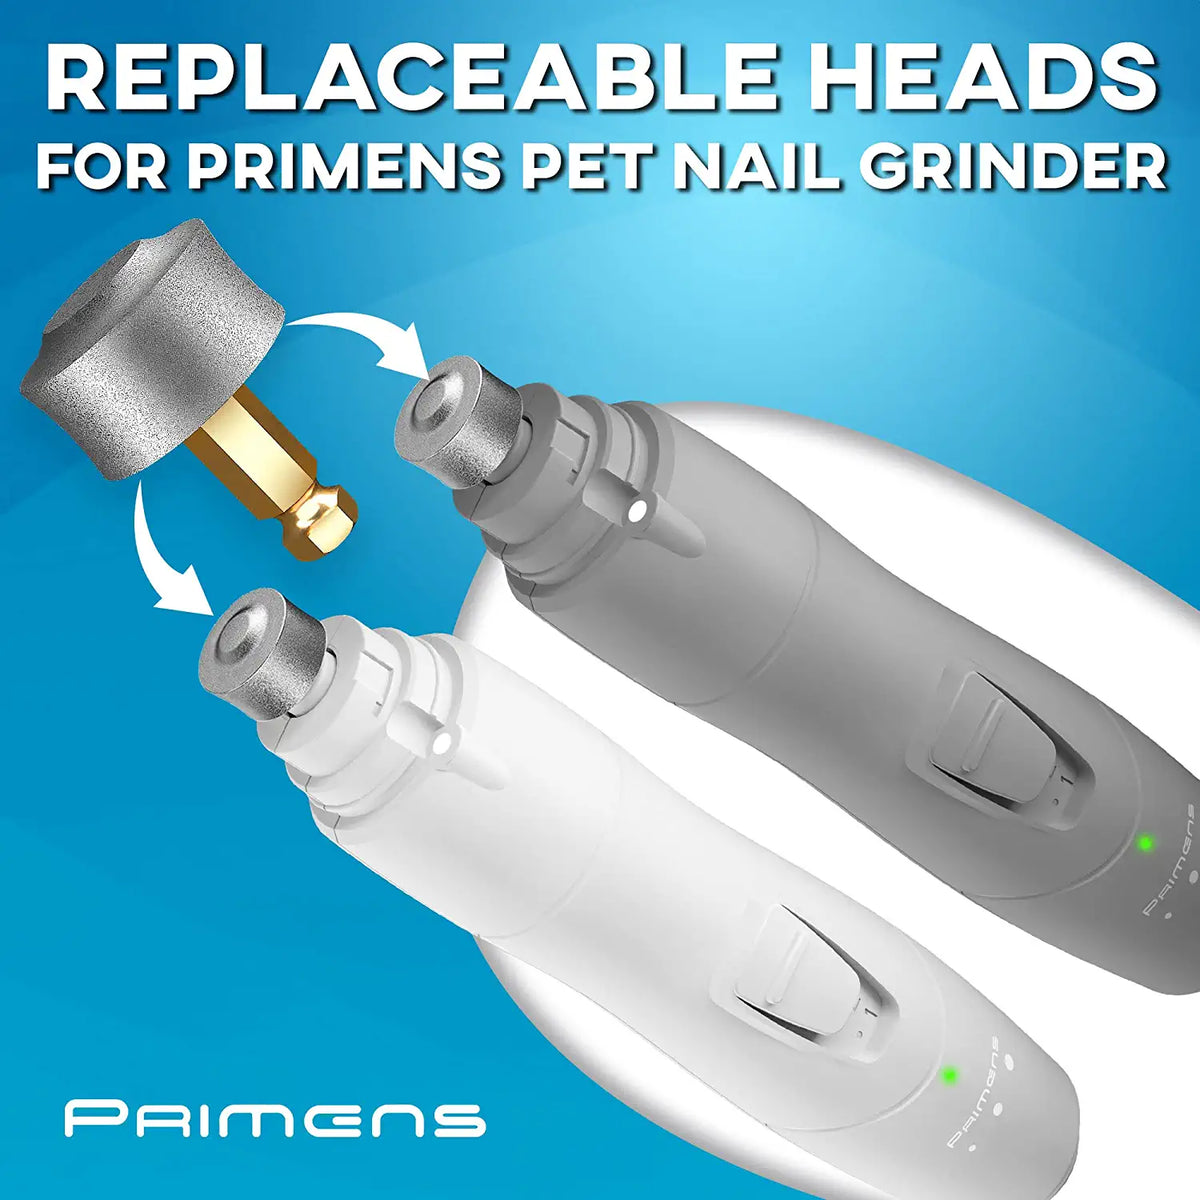 pet nail grinder with 3 replacement heads, Five Below